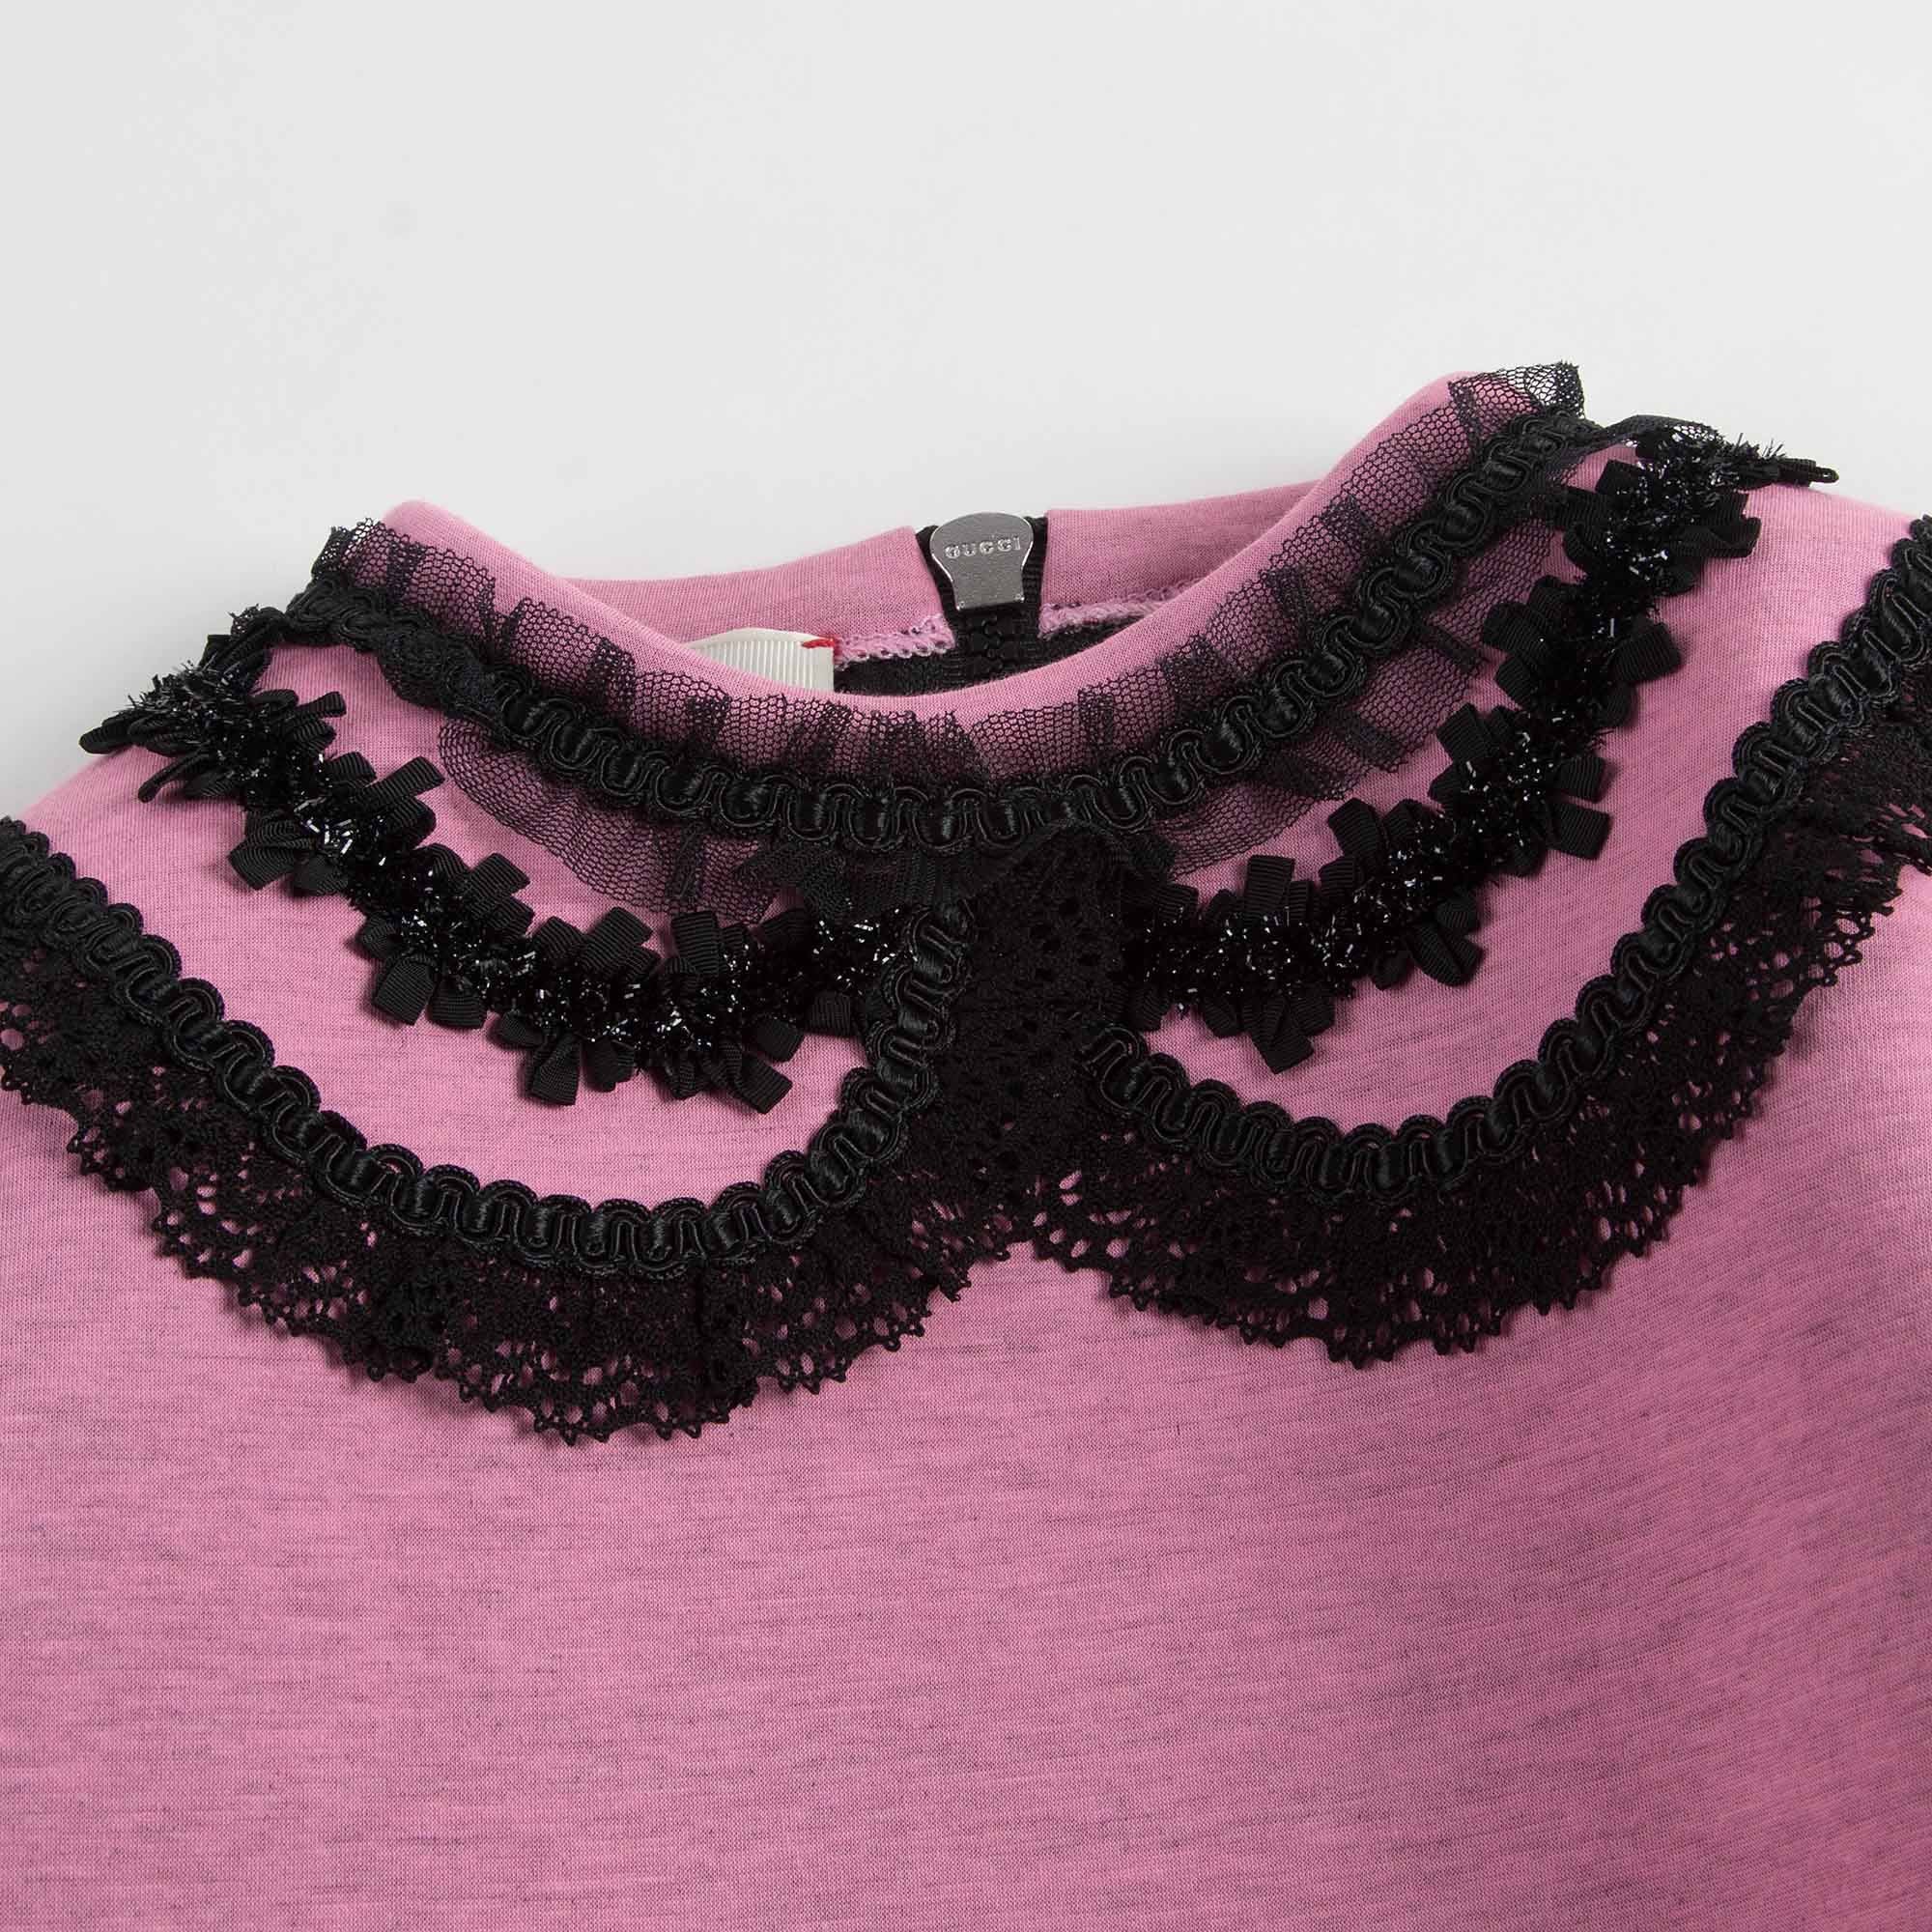 Girls Light Pink Lace Collar Knitted Sweater